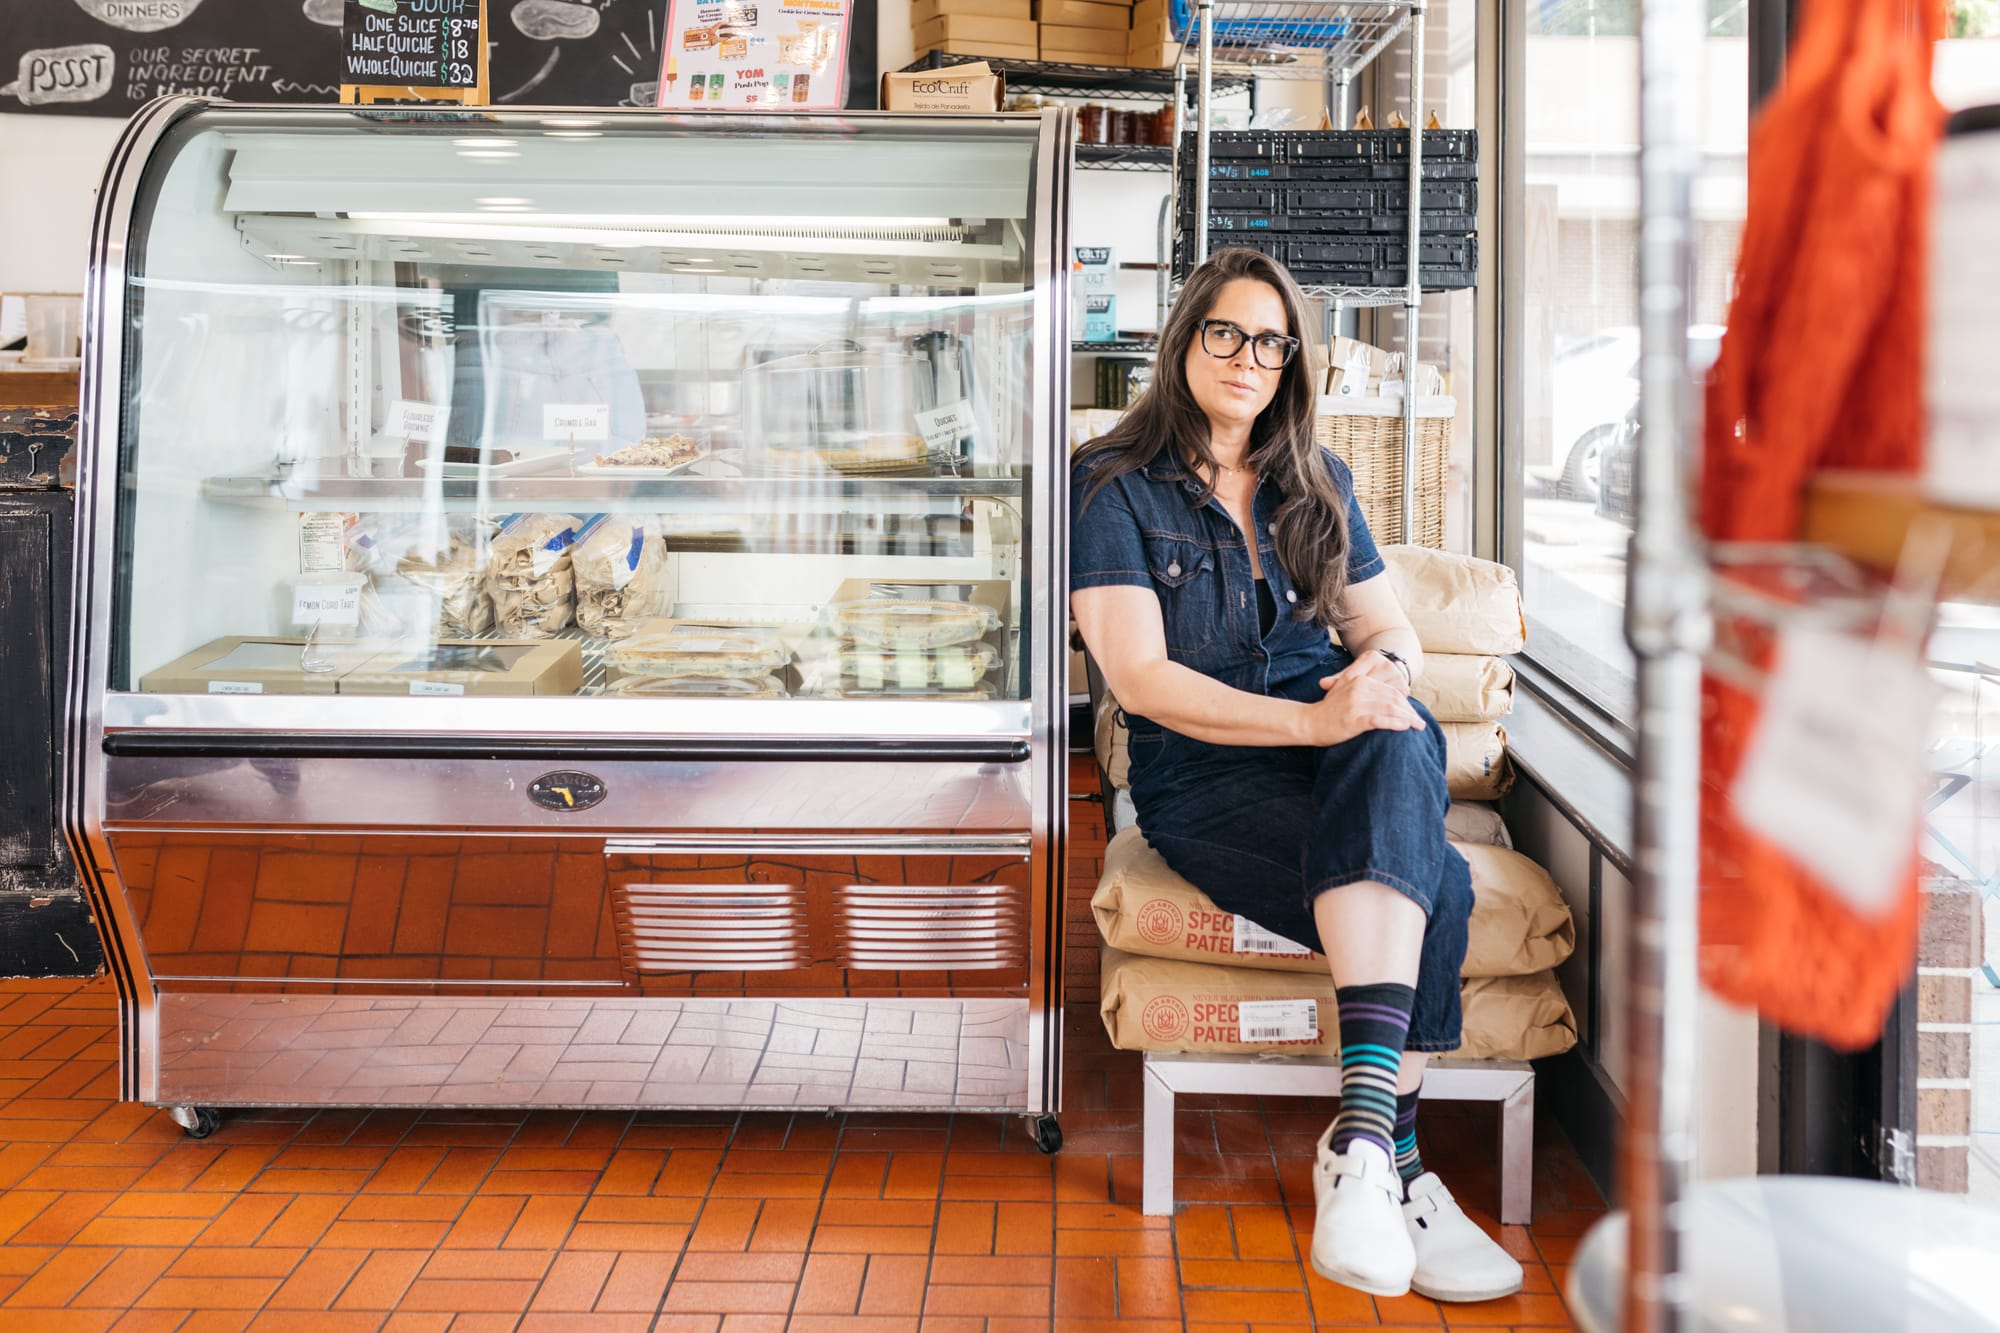 Reading the Bread: a business + bakery + love story.